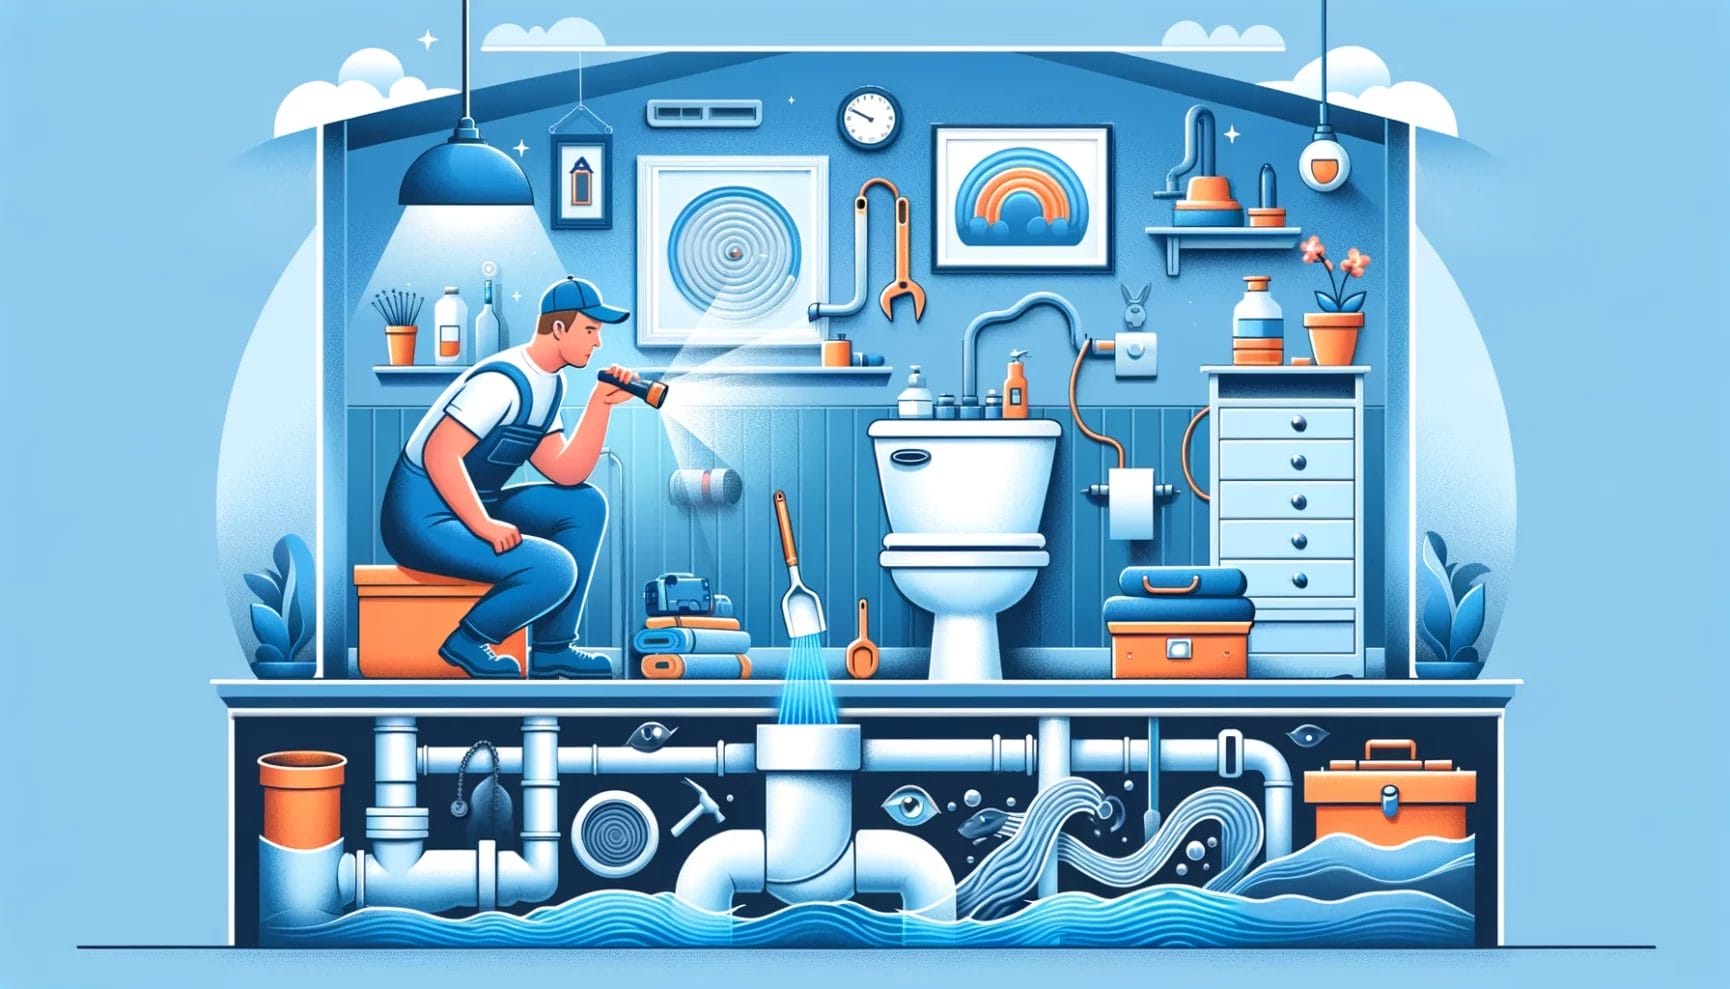 An illustration of a plumber working in a bathroom.